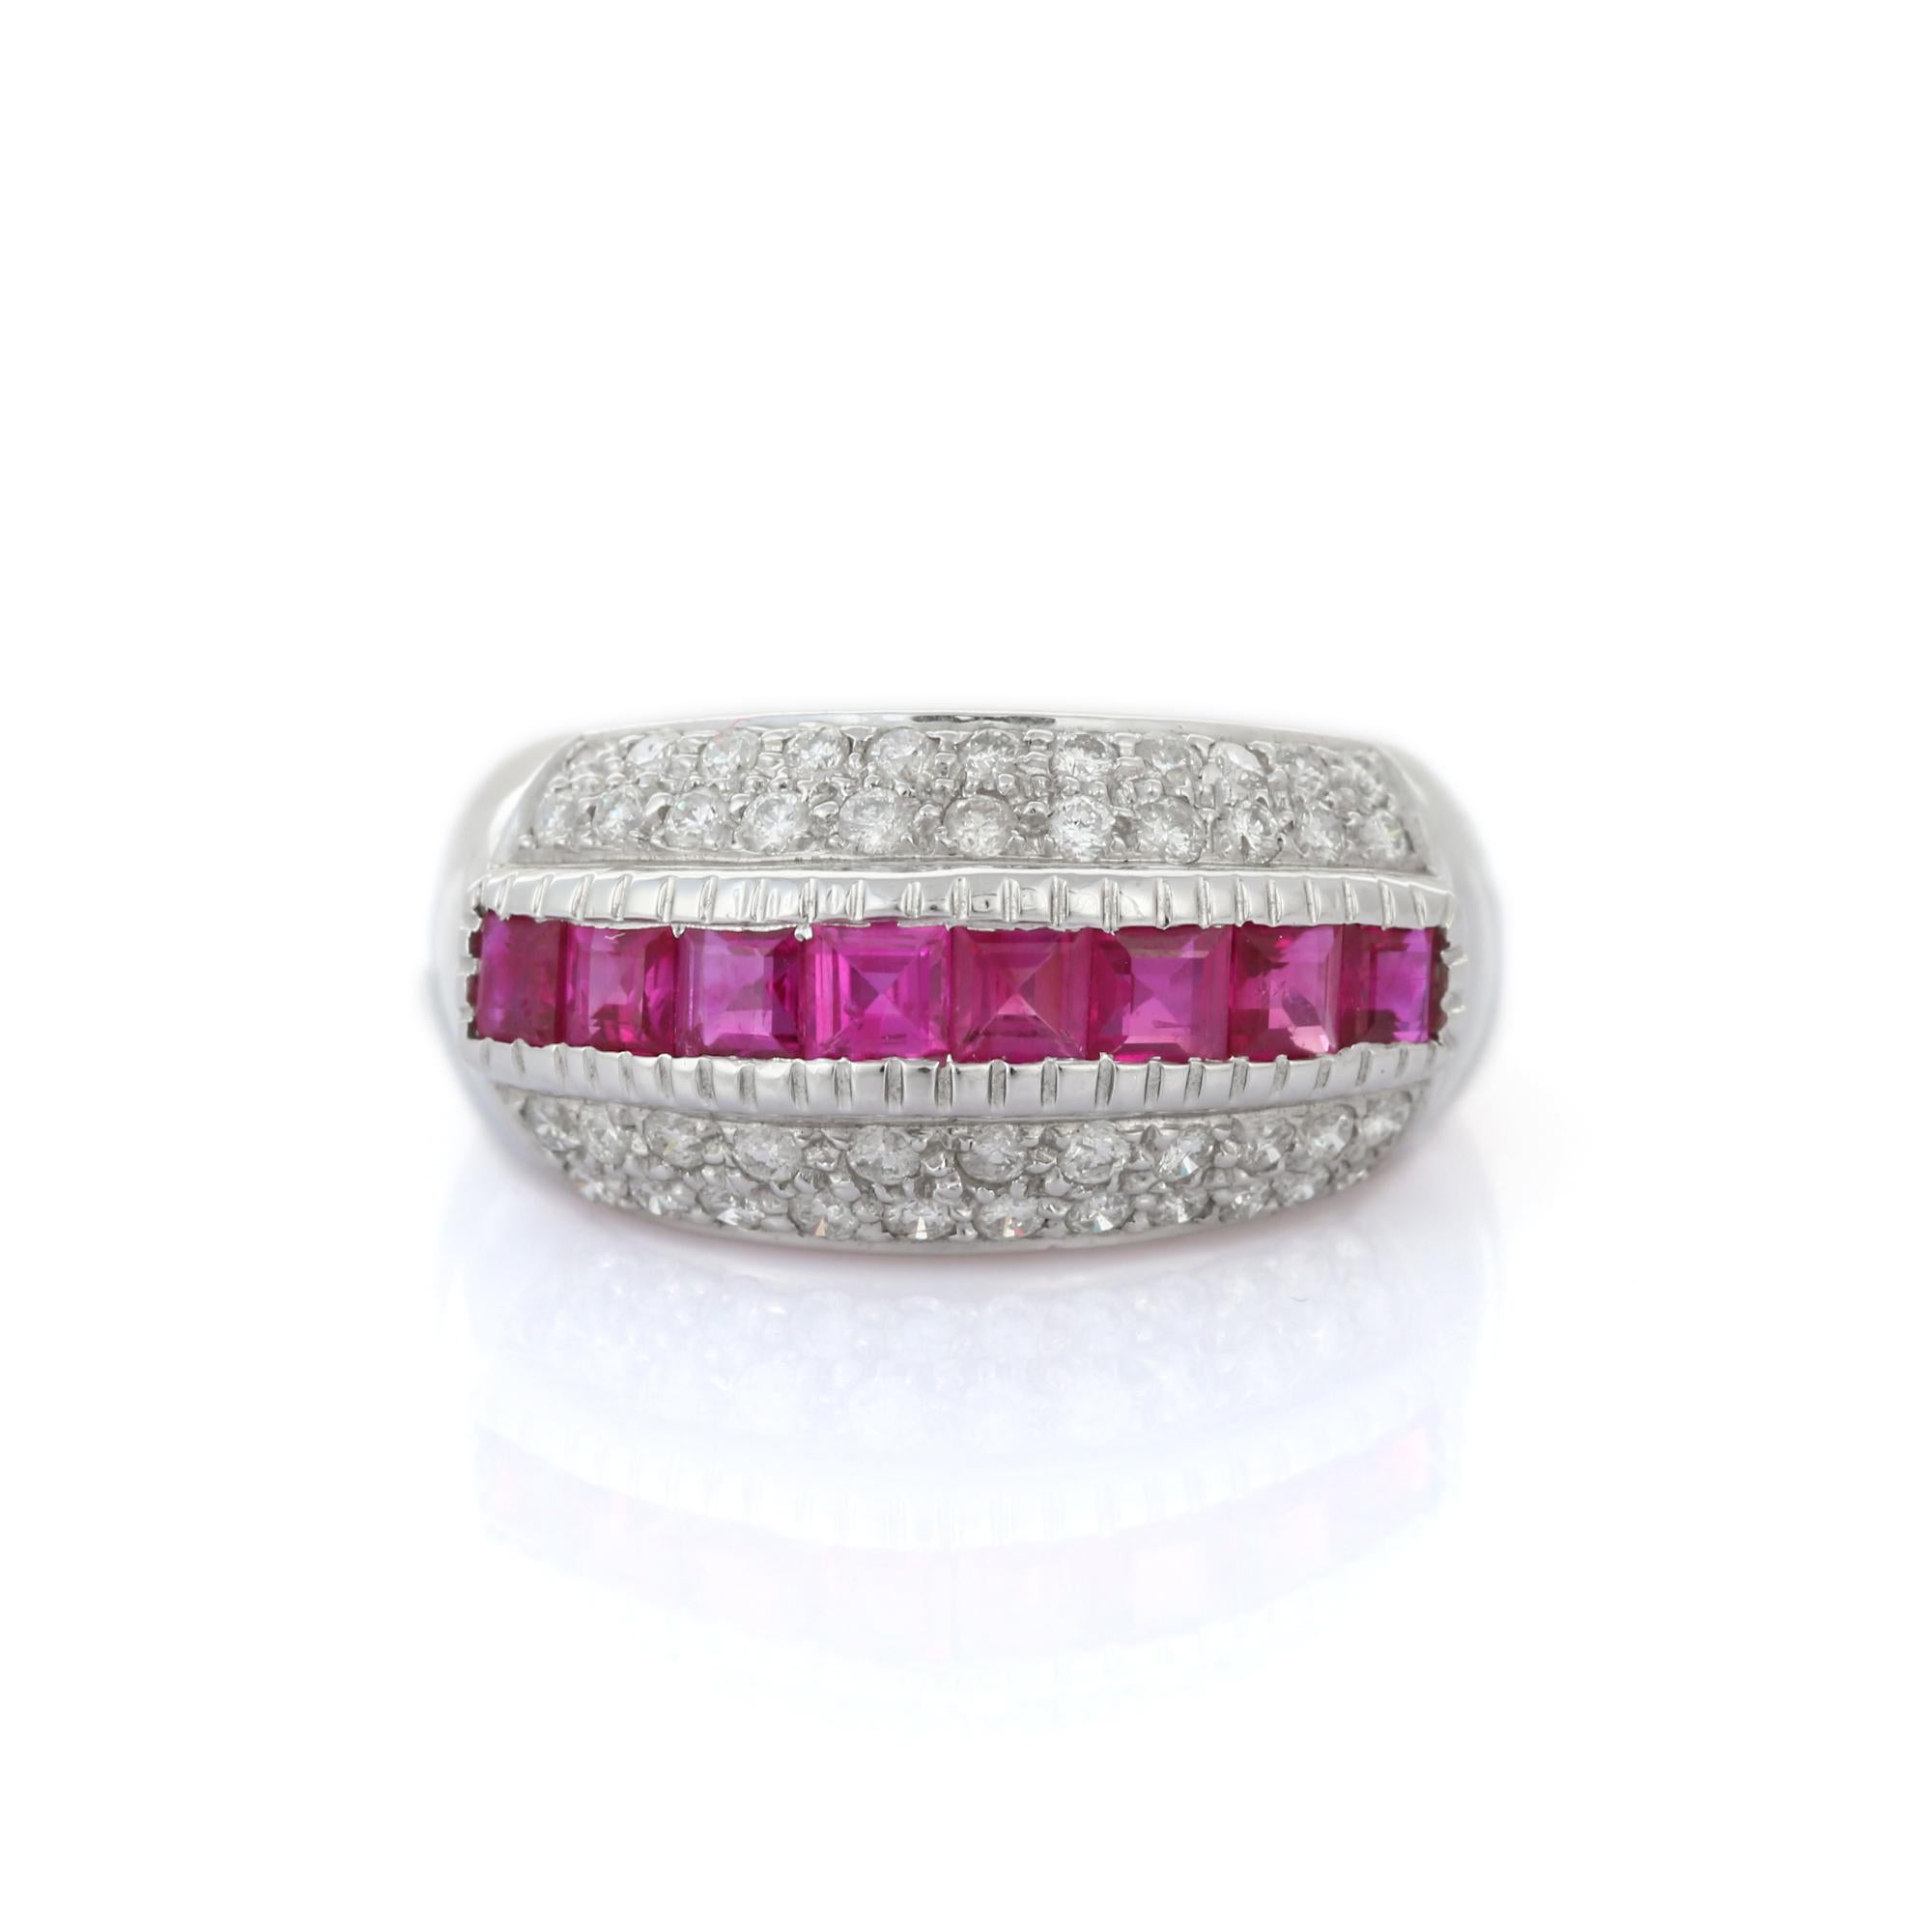 For Sale:  Unisex Ruby Diamond Wedding Dome Ring in 18k Solid White Gold 2